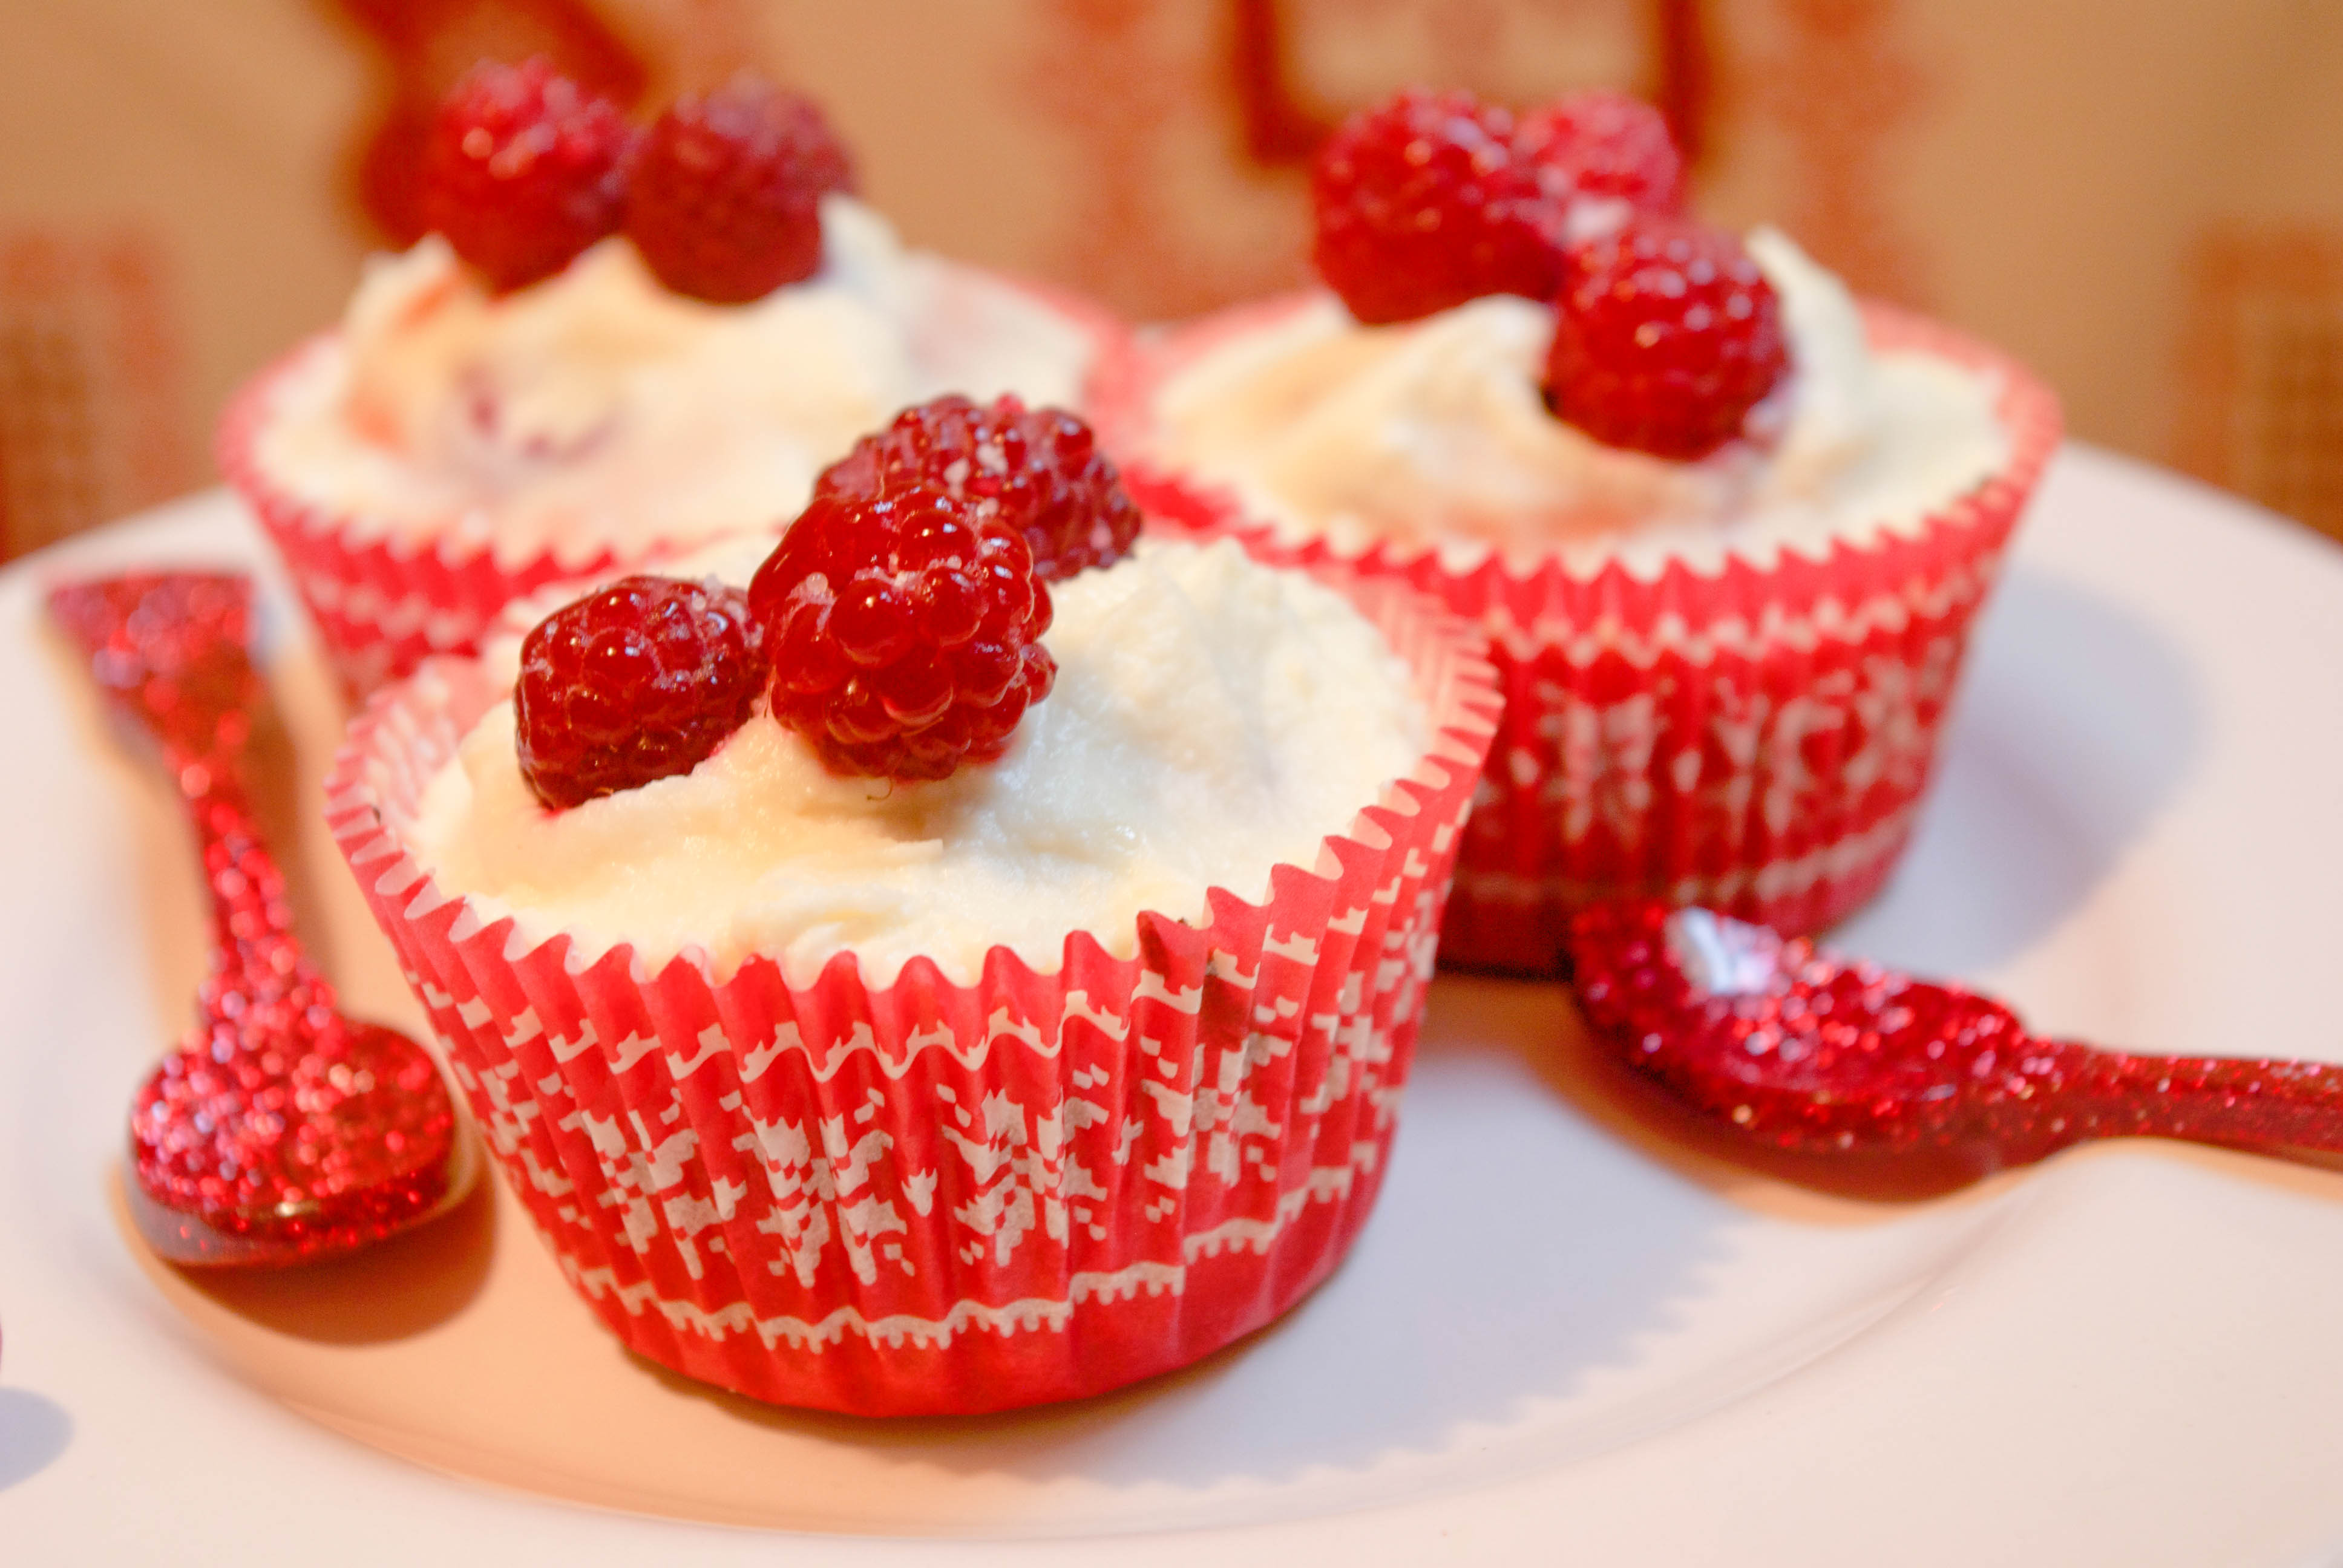 cupcakes fruits rouges